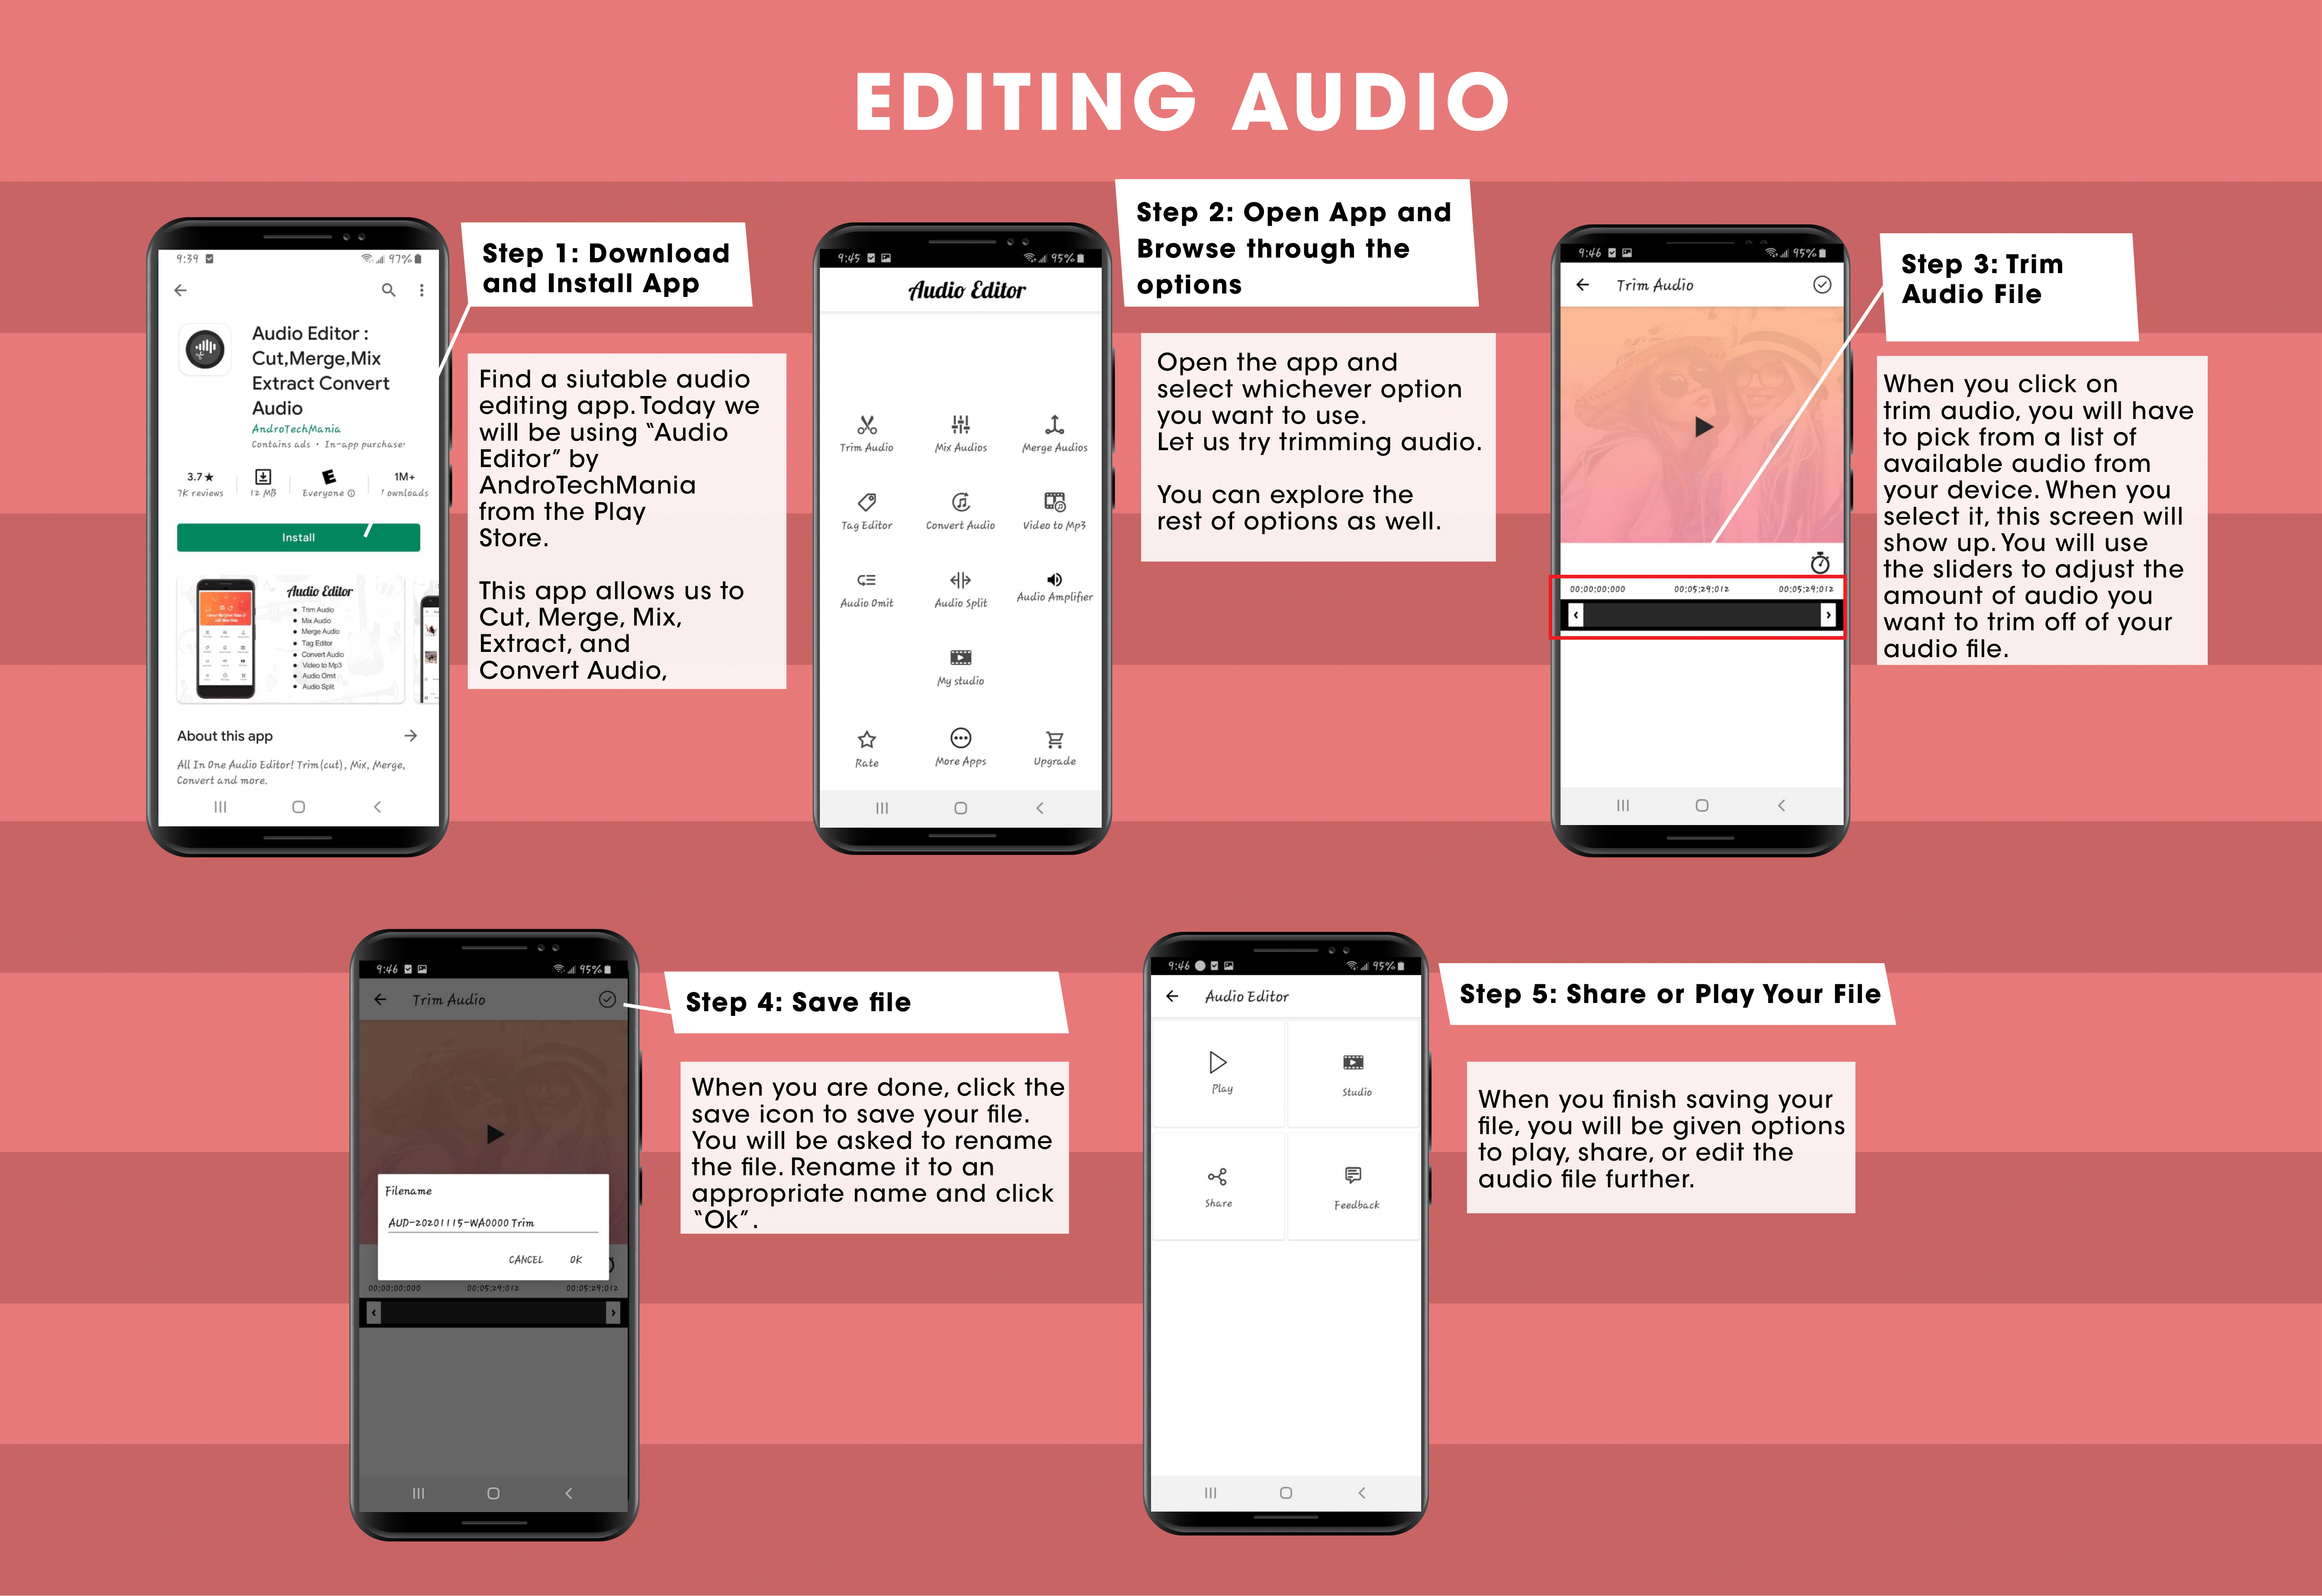 Graphic showing the different steps in editing audio